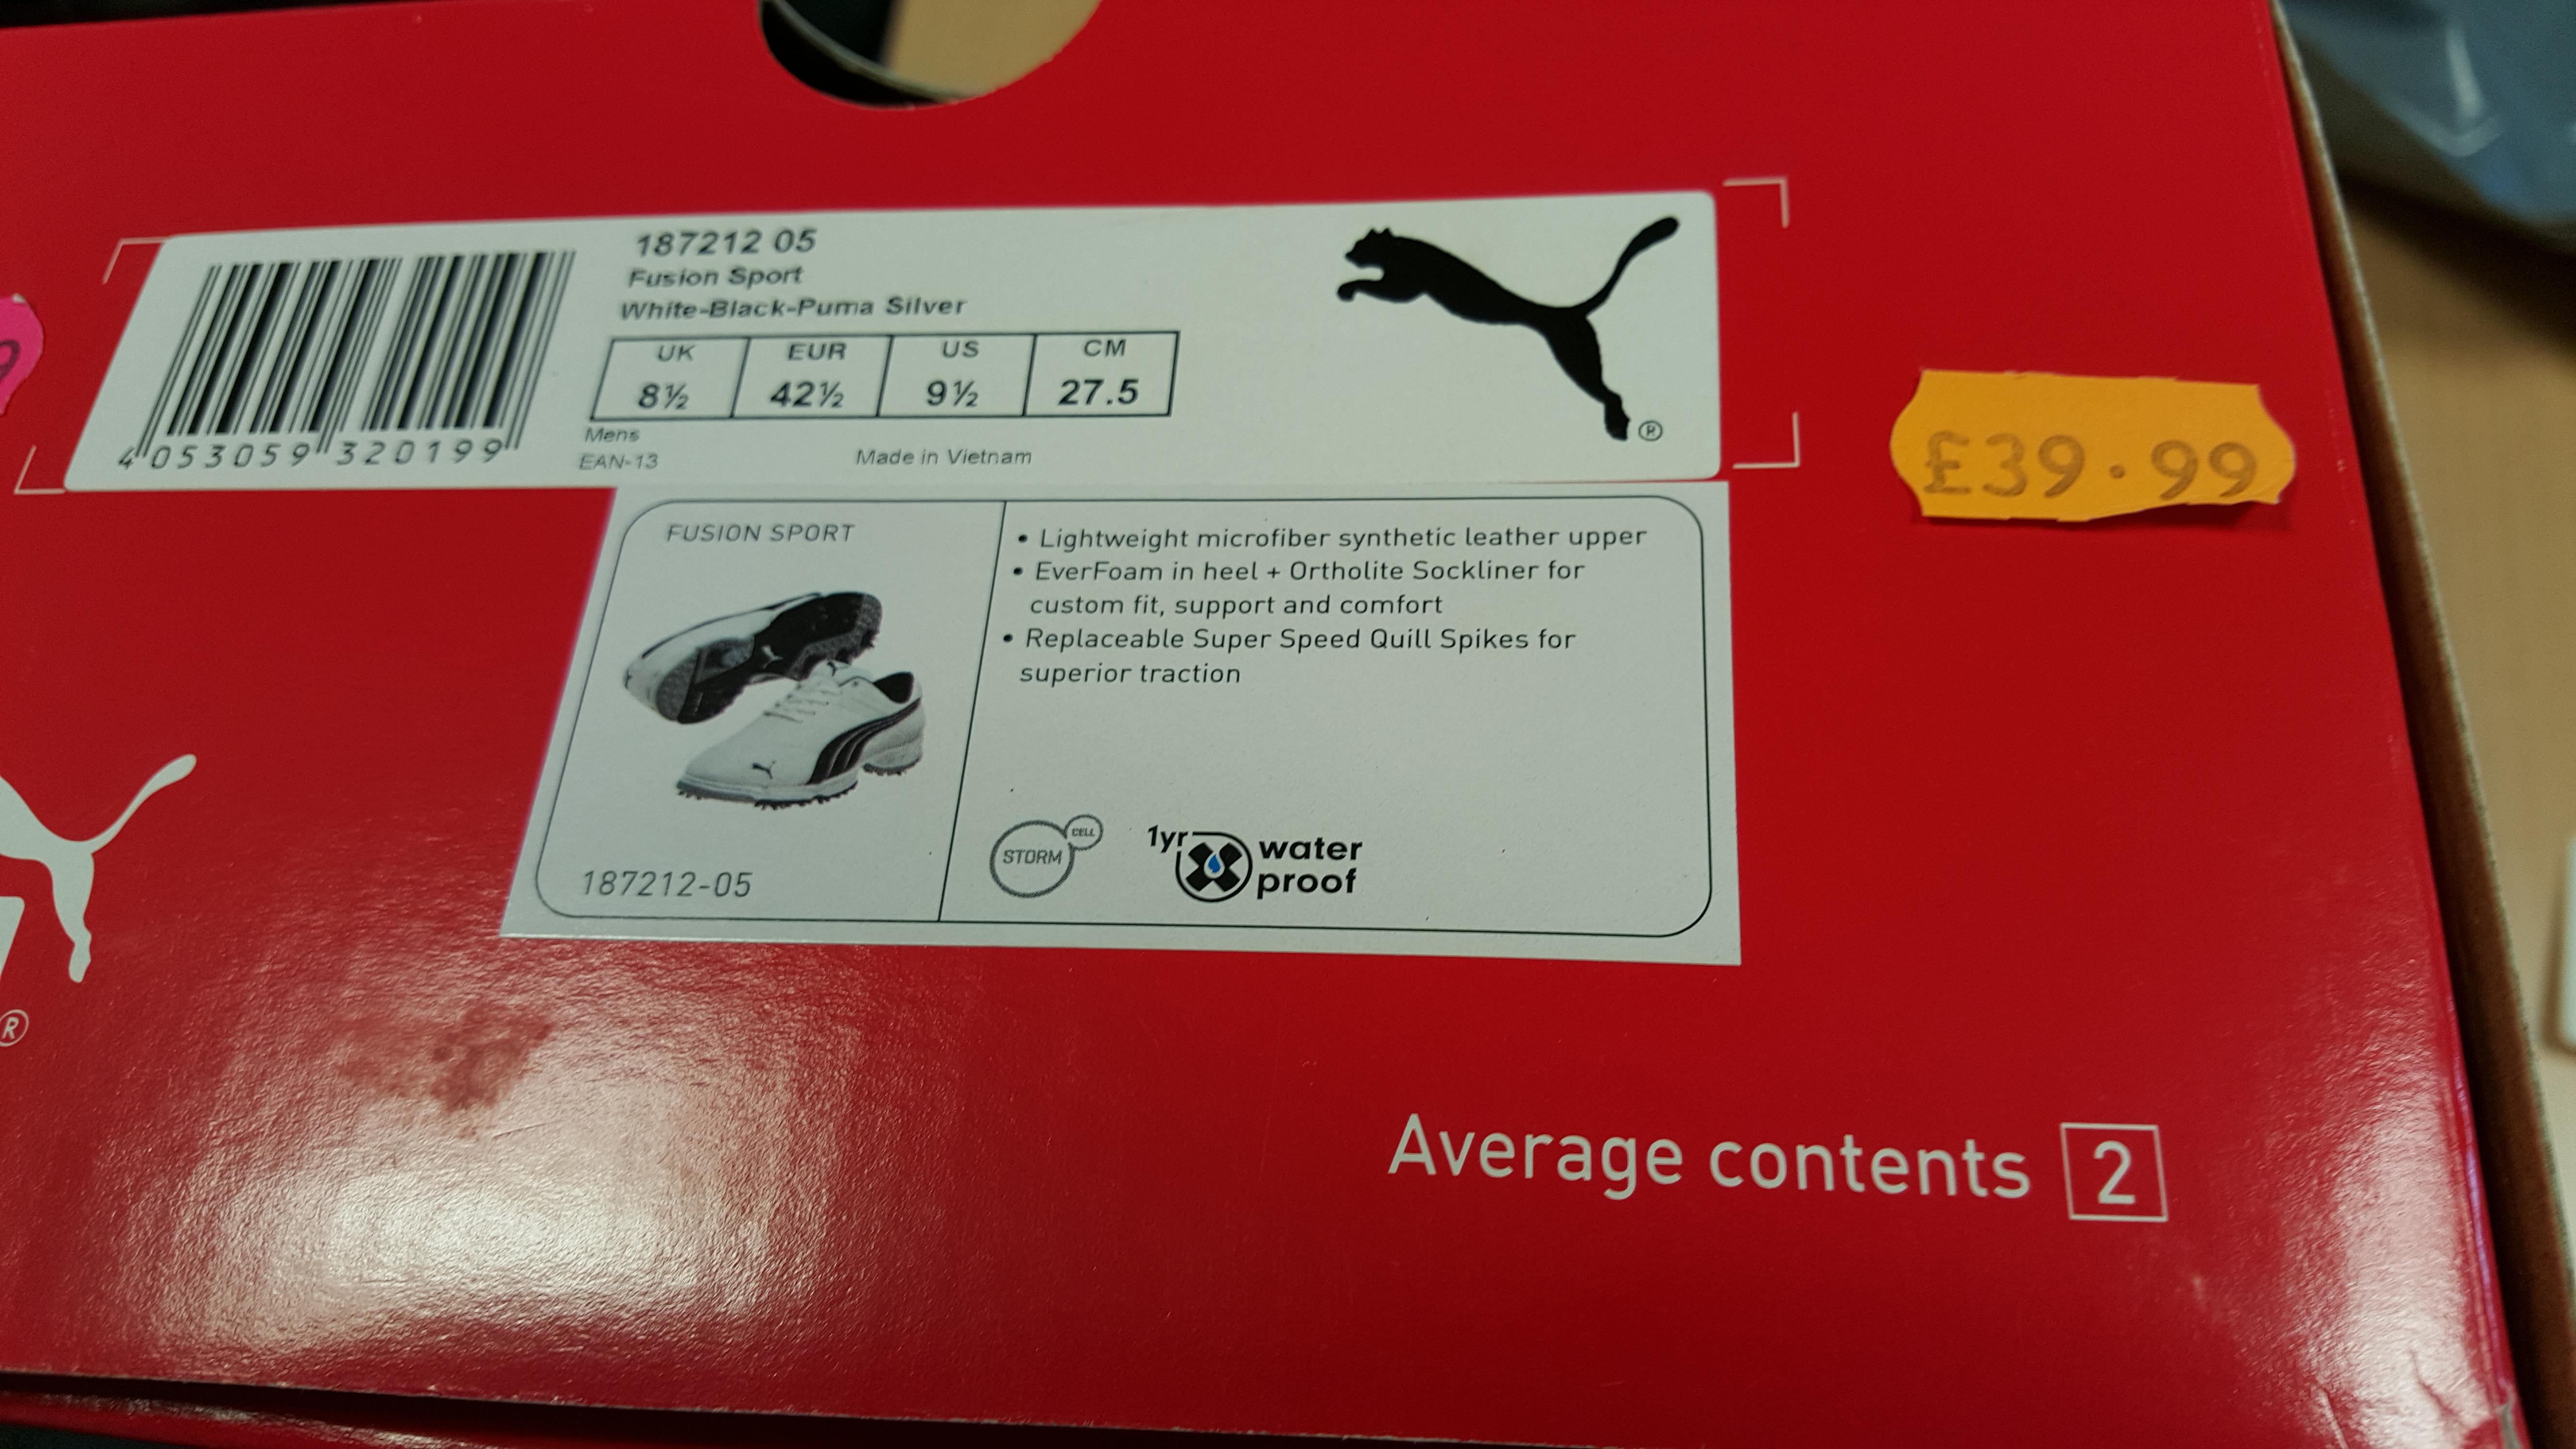 This shoe boxes states the average contents is 2.